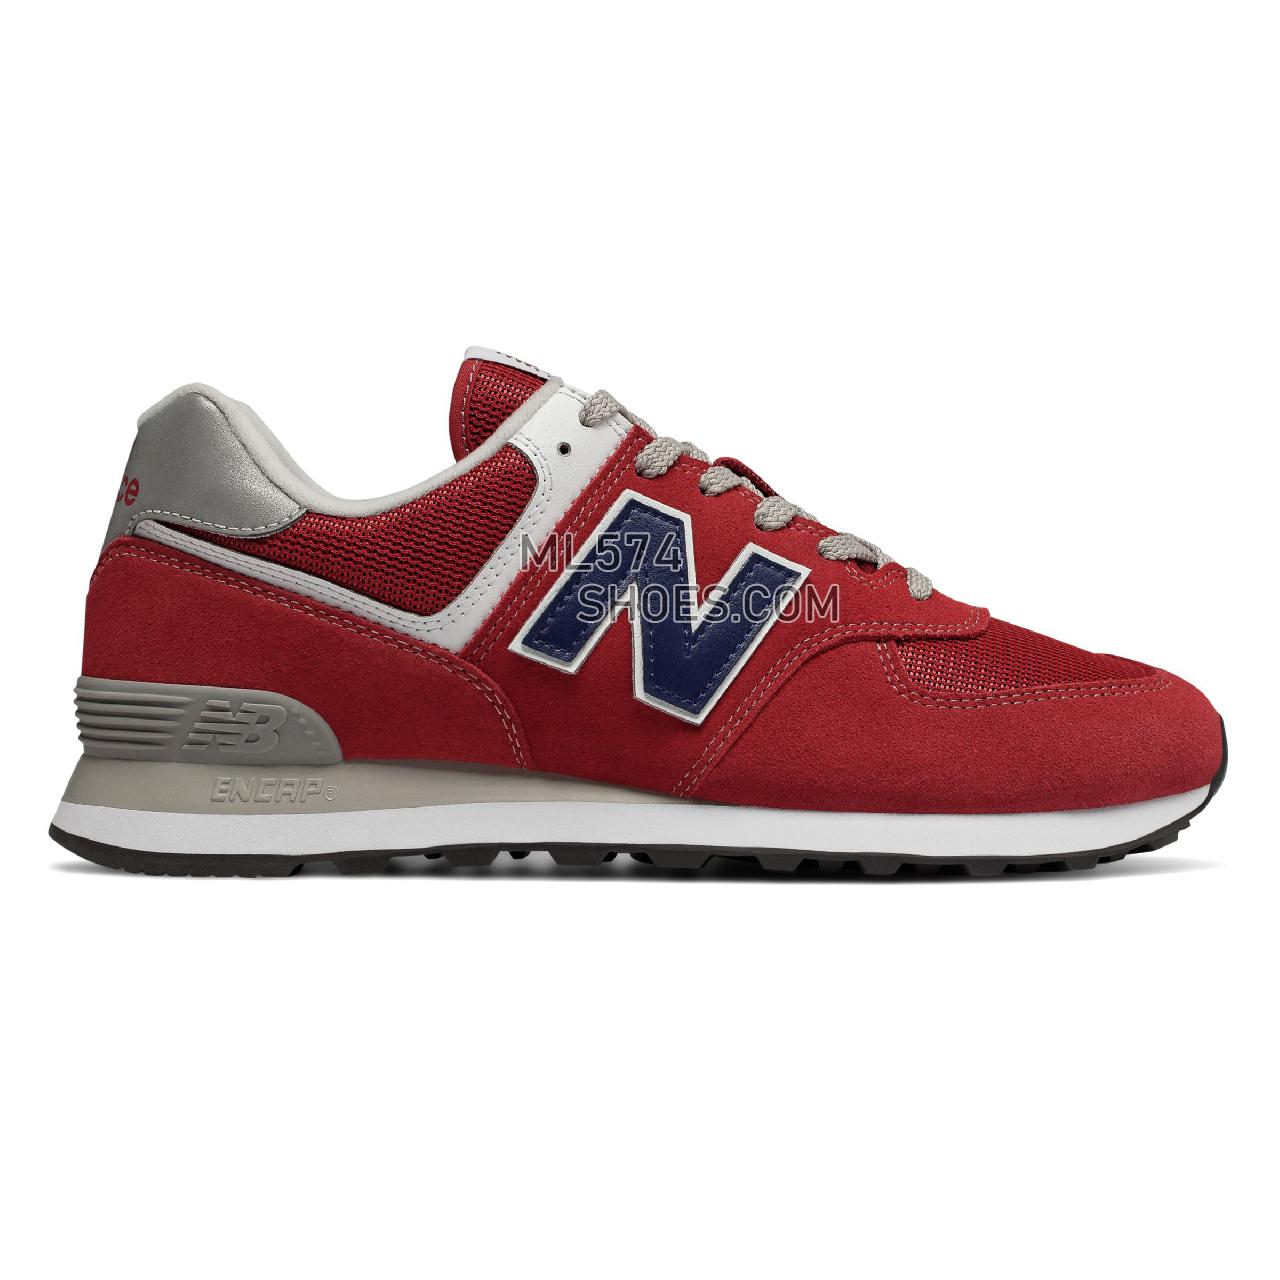 New Balance 574 - Men's 574 - Classic Red with Blue - ML574ATR